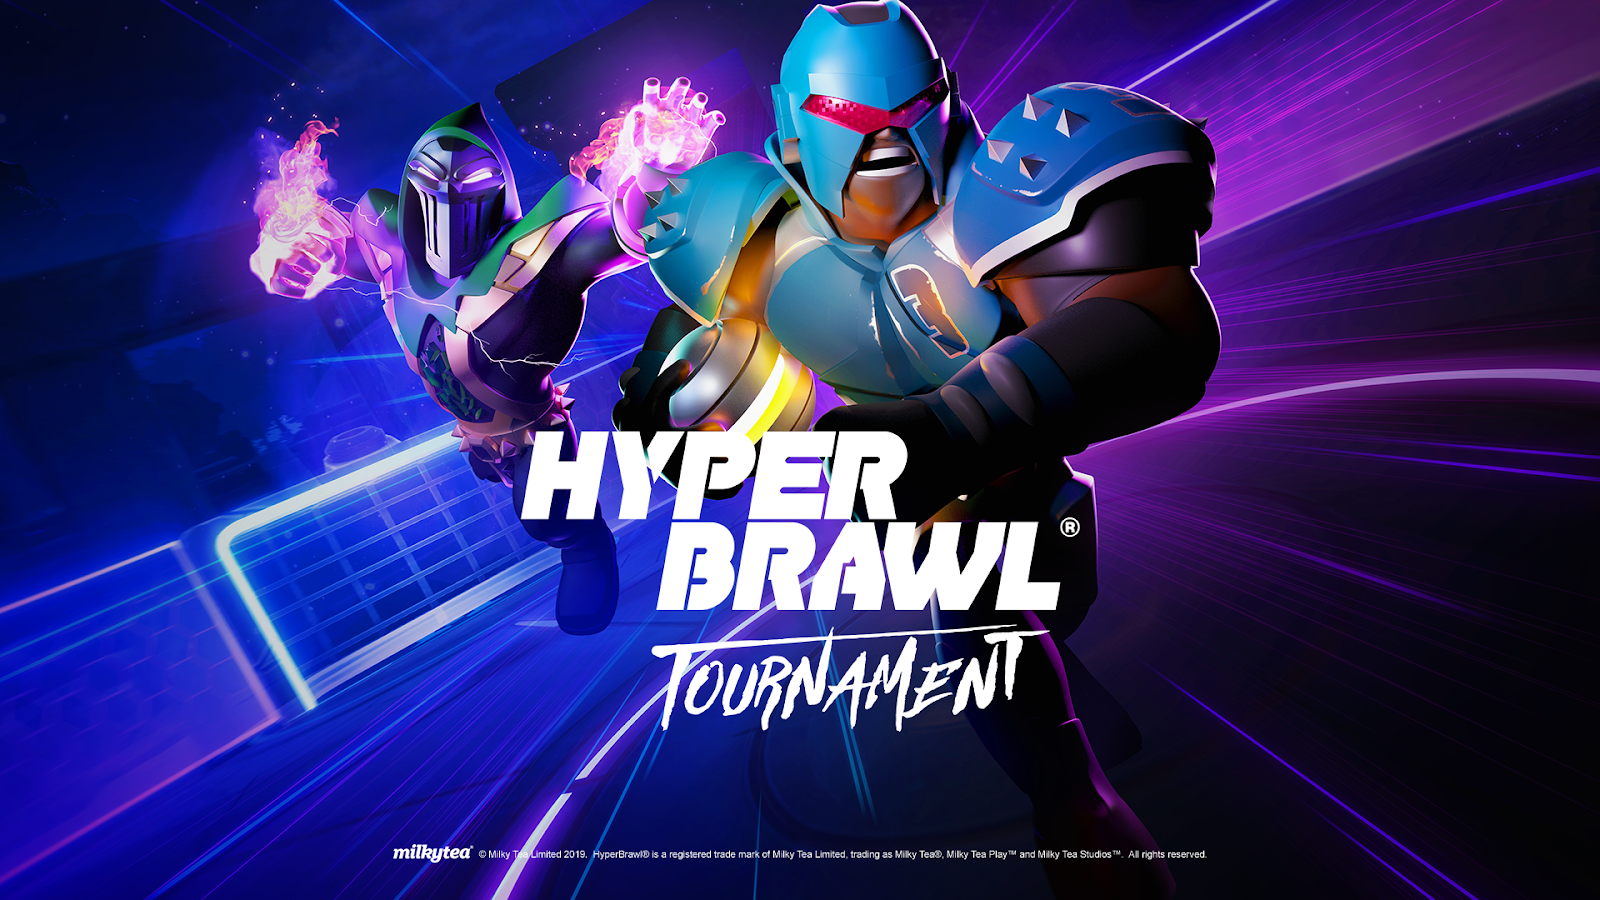 Watch the new Introduction to HyperBrawl Tournament